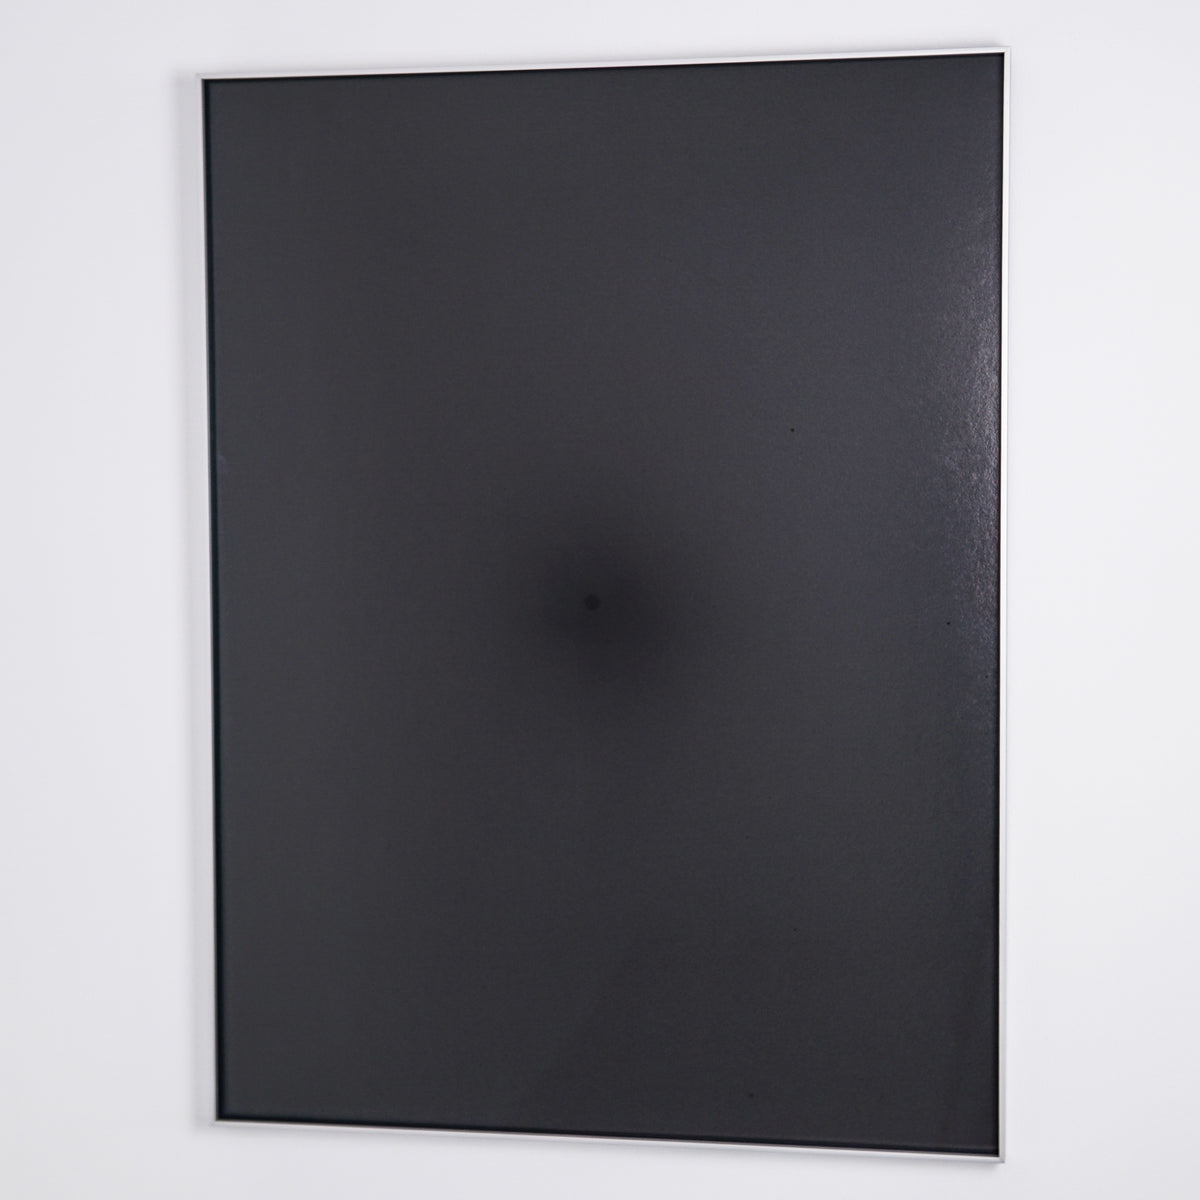 Inês Mendes Leal | #113 | 2021 | 102 x 76,5 cm  | Pigment inkjet print on barite paper | Ungoing sun series.